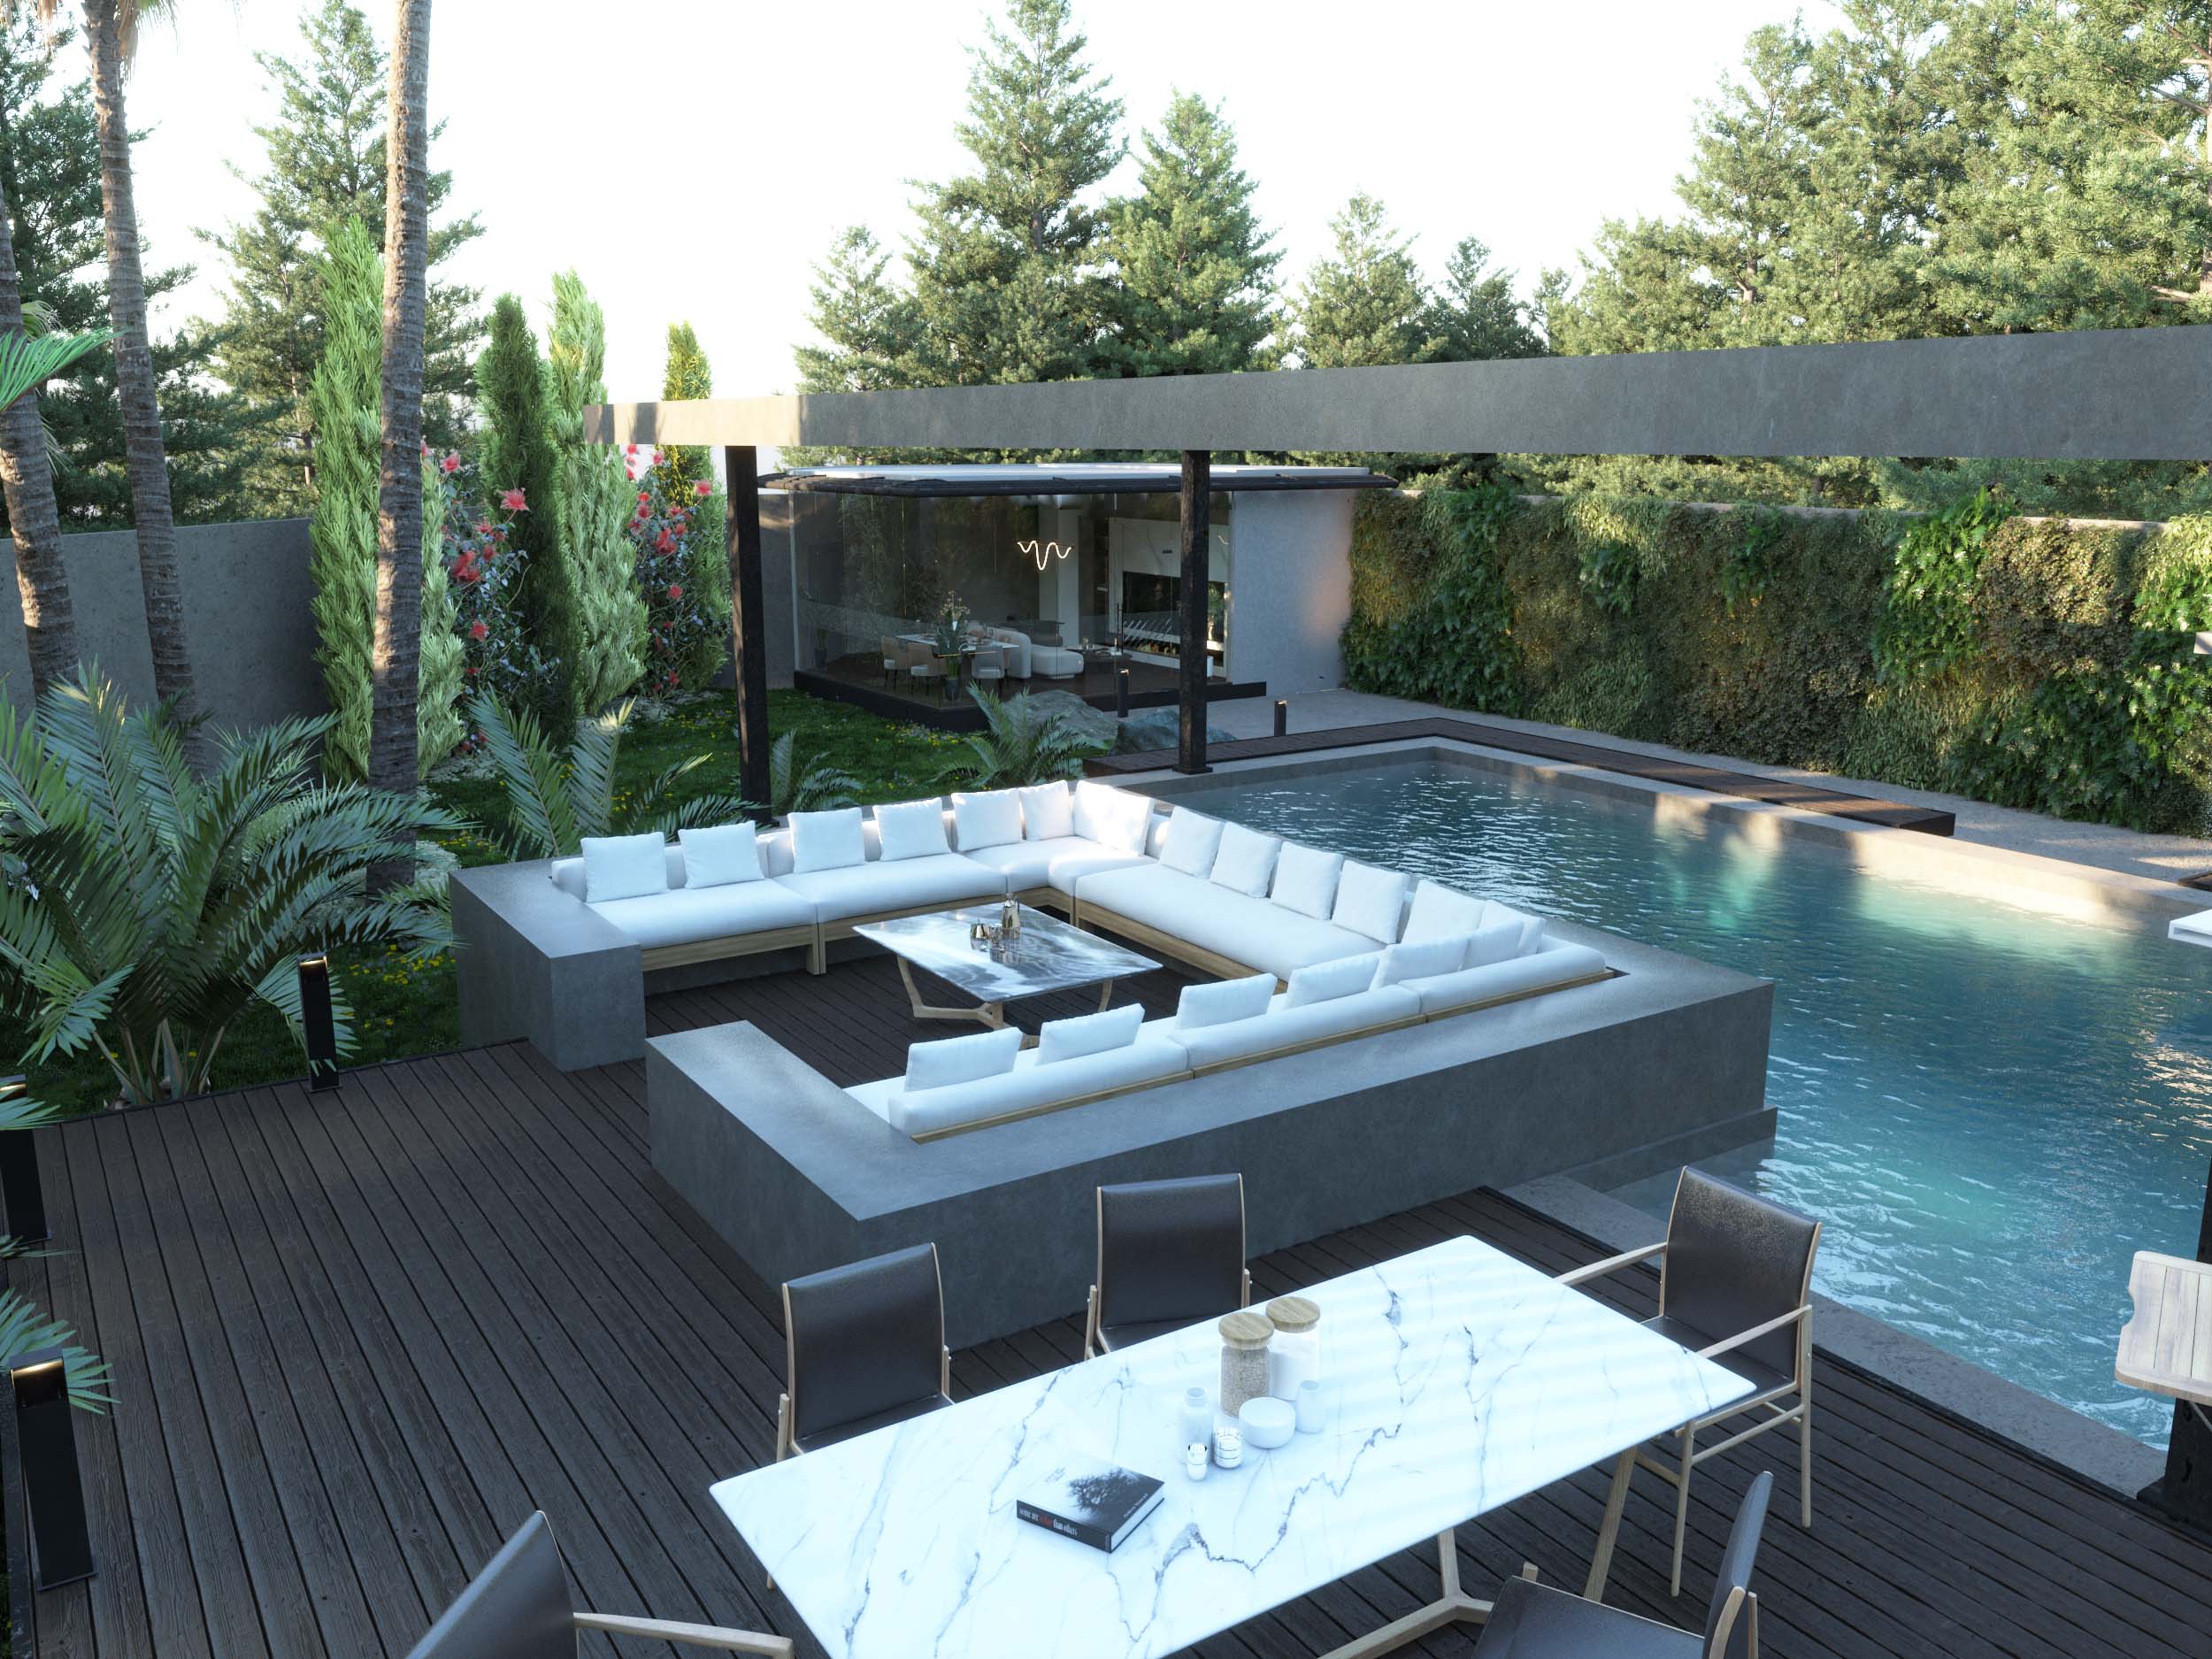 SWIMMING POOL AREA DESIGN - sitting area - water - dining area 